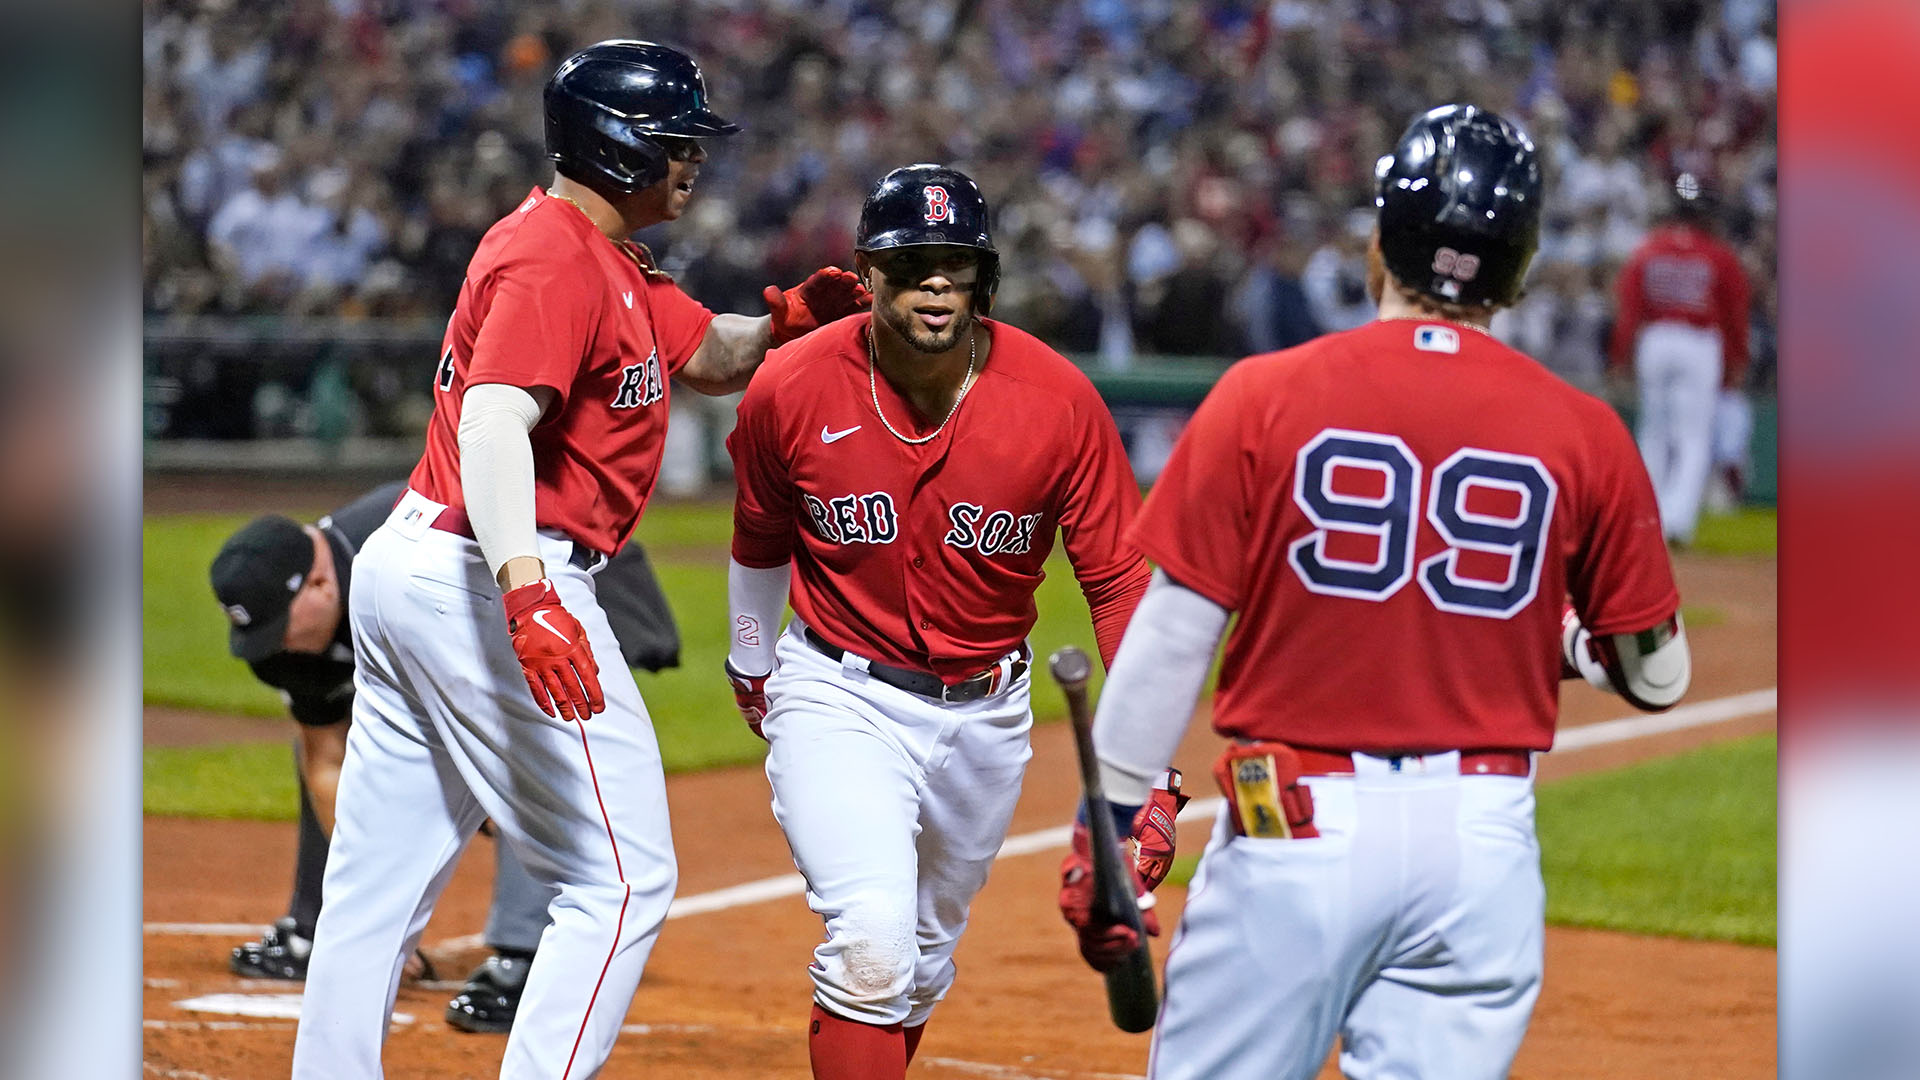 Xander Bogaerts, Padres finalize $280 million, 11-year deal